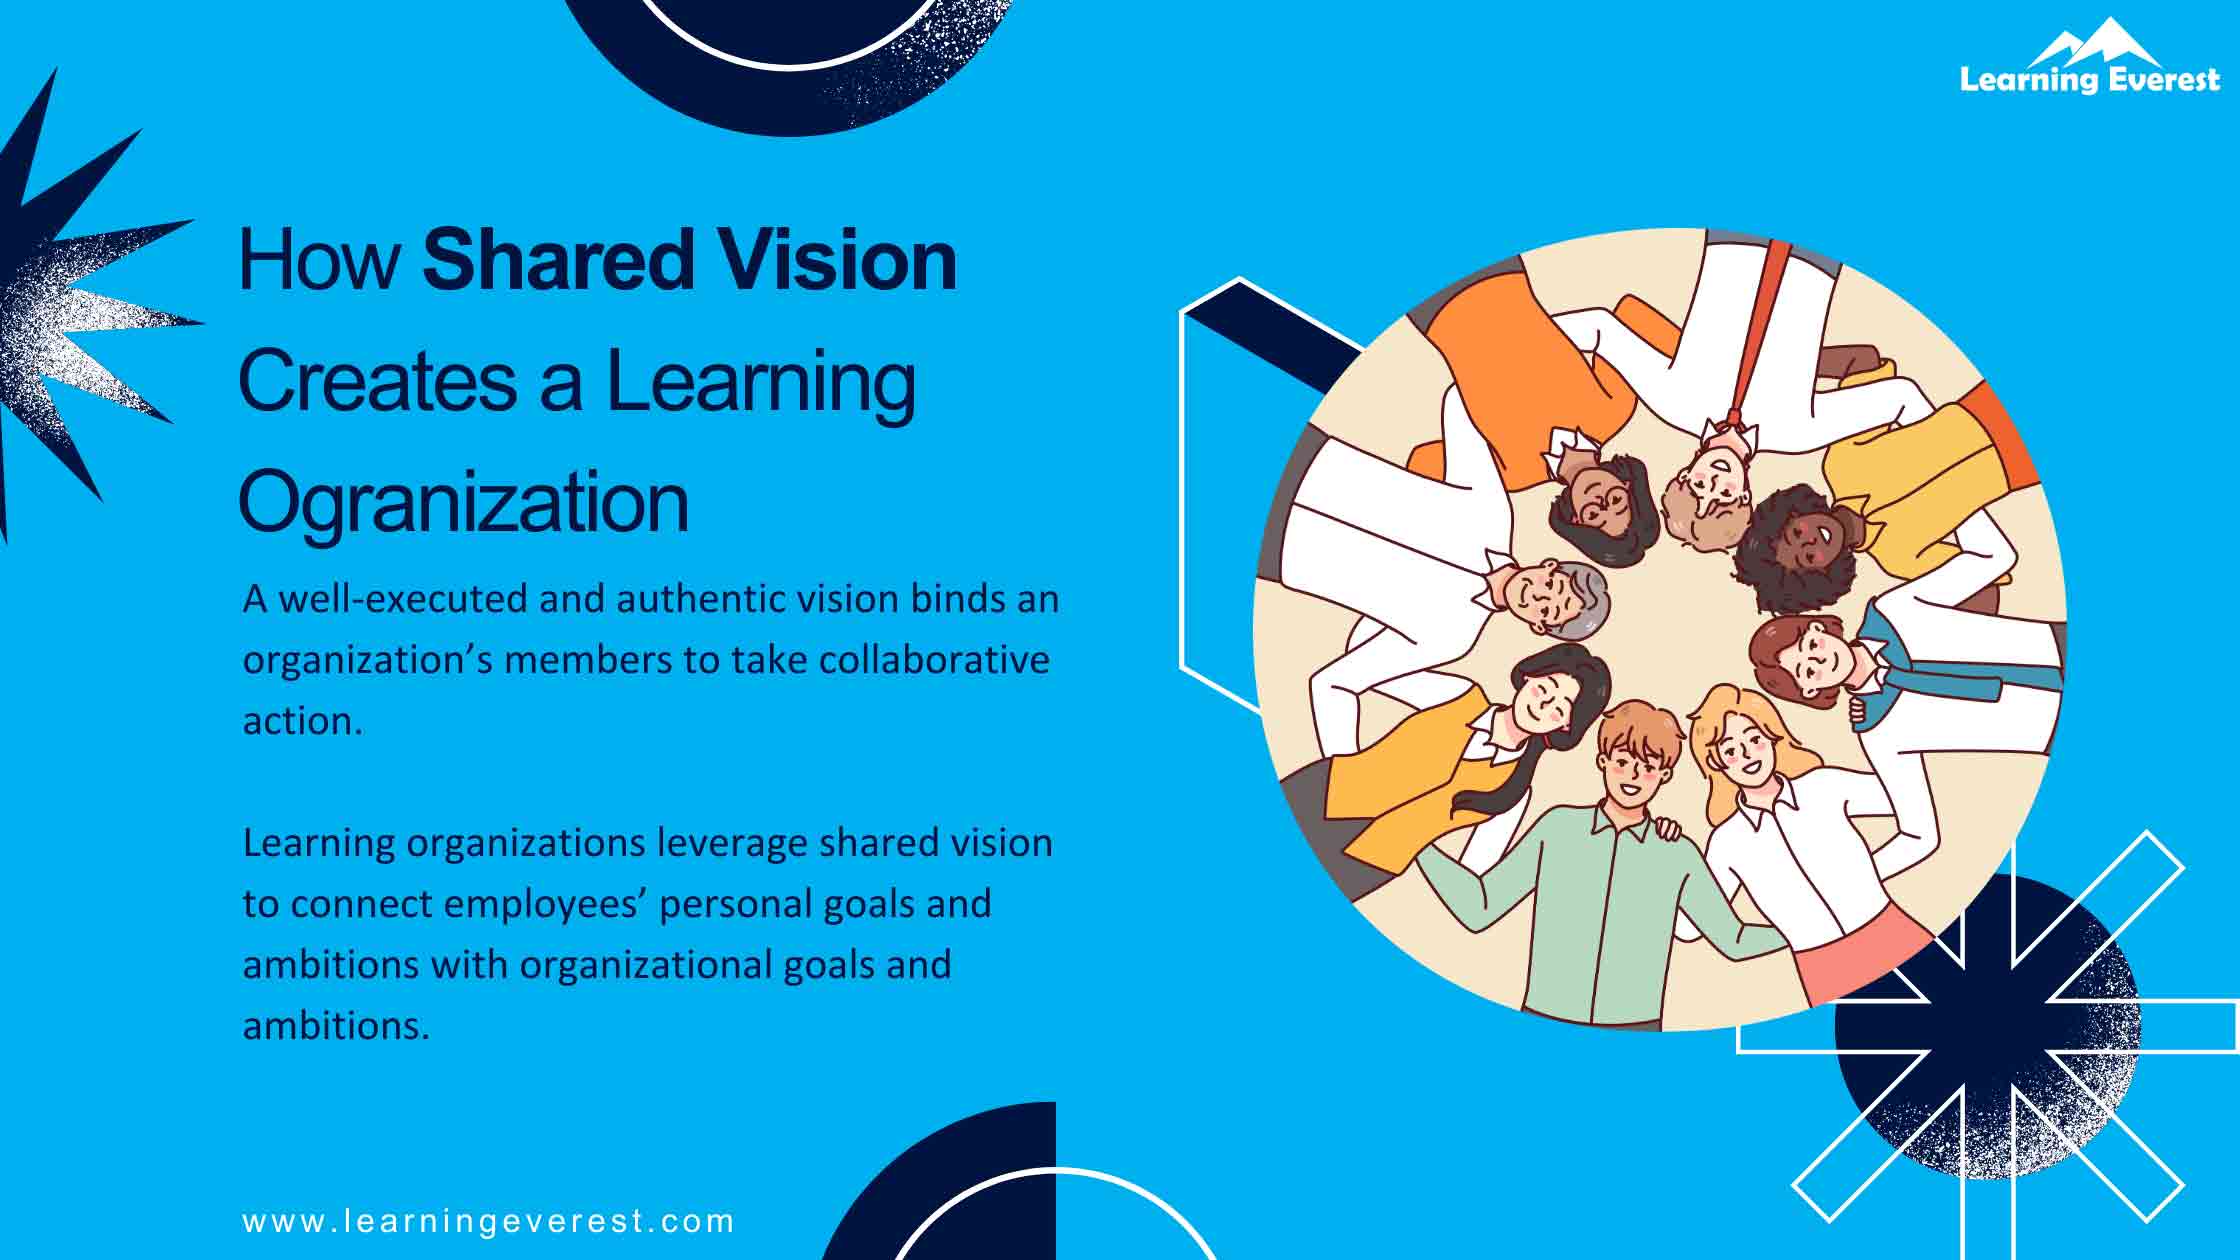 Disciplines of a Learning Organization - Building Shared Vision